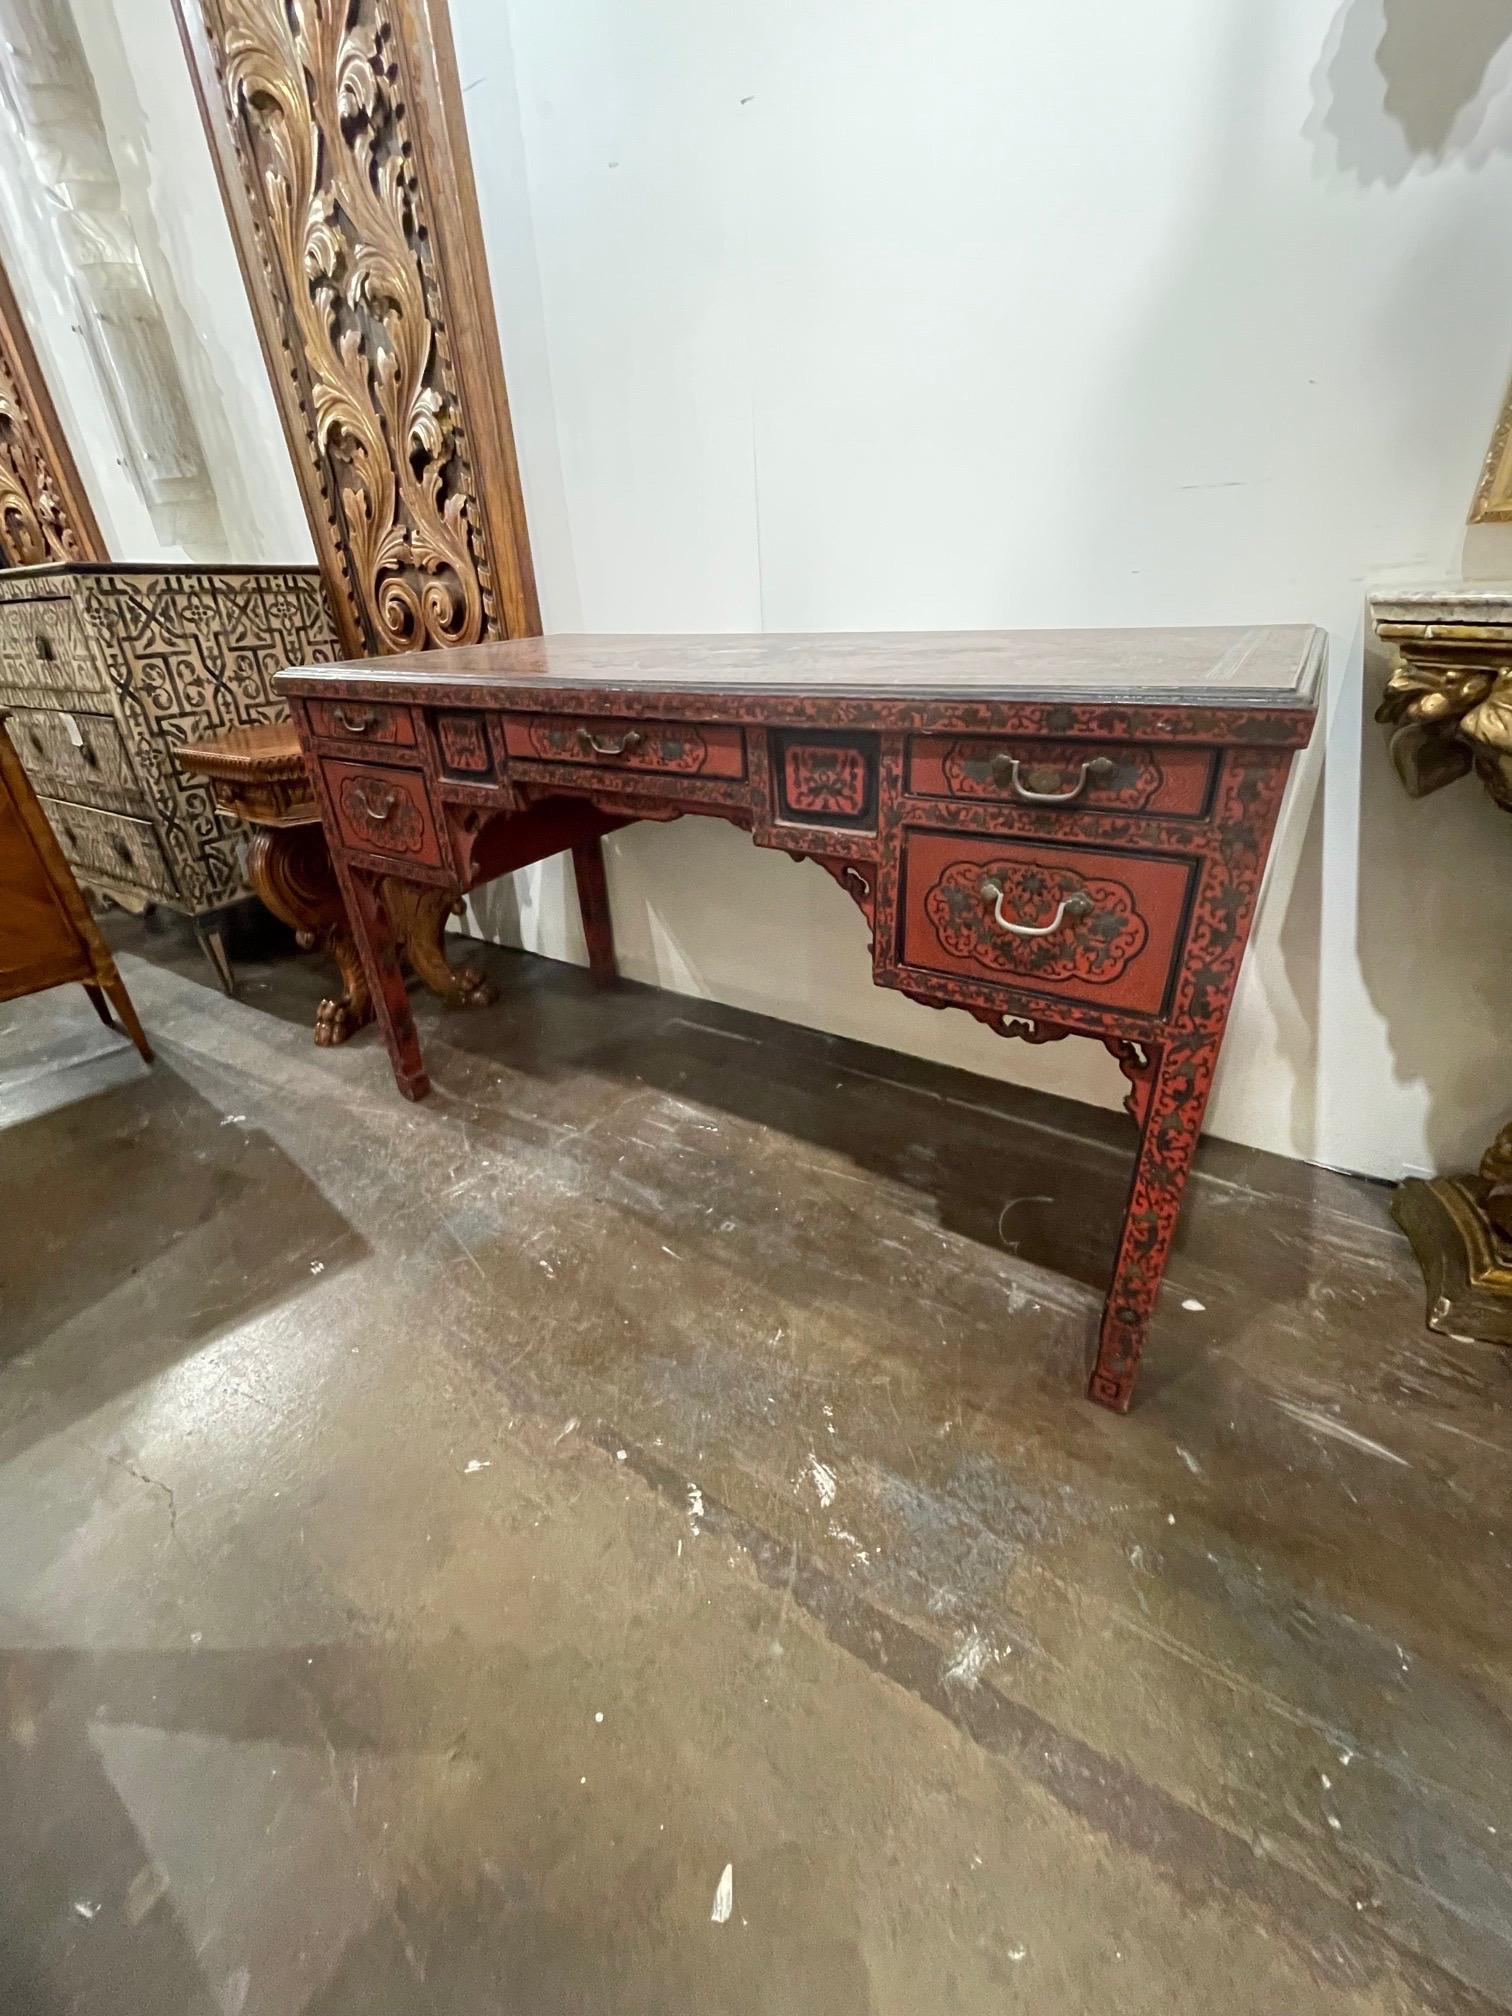 Decorative early 20th century Chinese red and black lacquered writing desk. Gorgeous painted patterns and Asian images. So unique! An exceptional piece!.